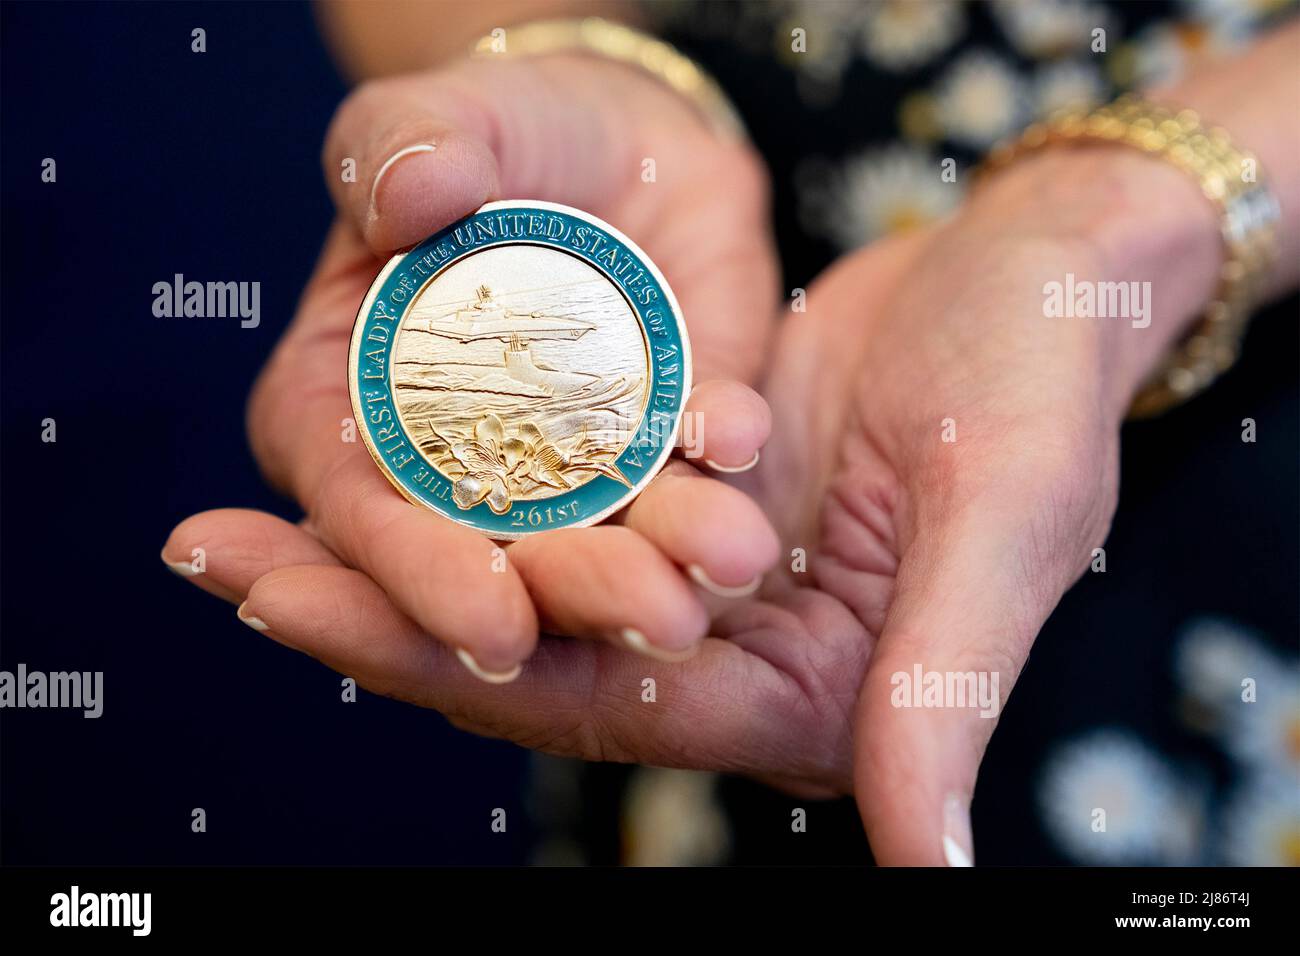 Mihail Kogalniceanu, Romania. 06 May, 2022. U.S. First Lady Jill Biden, shows the front of her personal Challenge Coin which she presented to a member of the Delaware National Guard stationed at Mihail Kogalniceanu Air Base, May 6, 2022 in Mihail Kogalniceanu, Romania. Credit: Cameron Smith/White House Photo/Alamy Live News Stock Photo